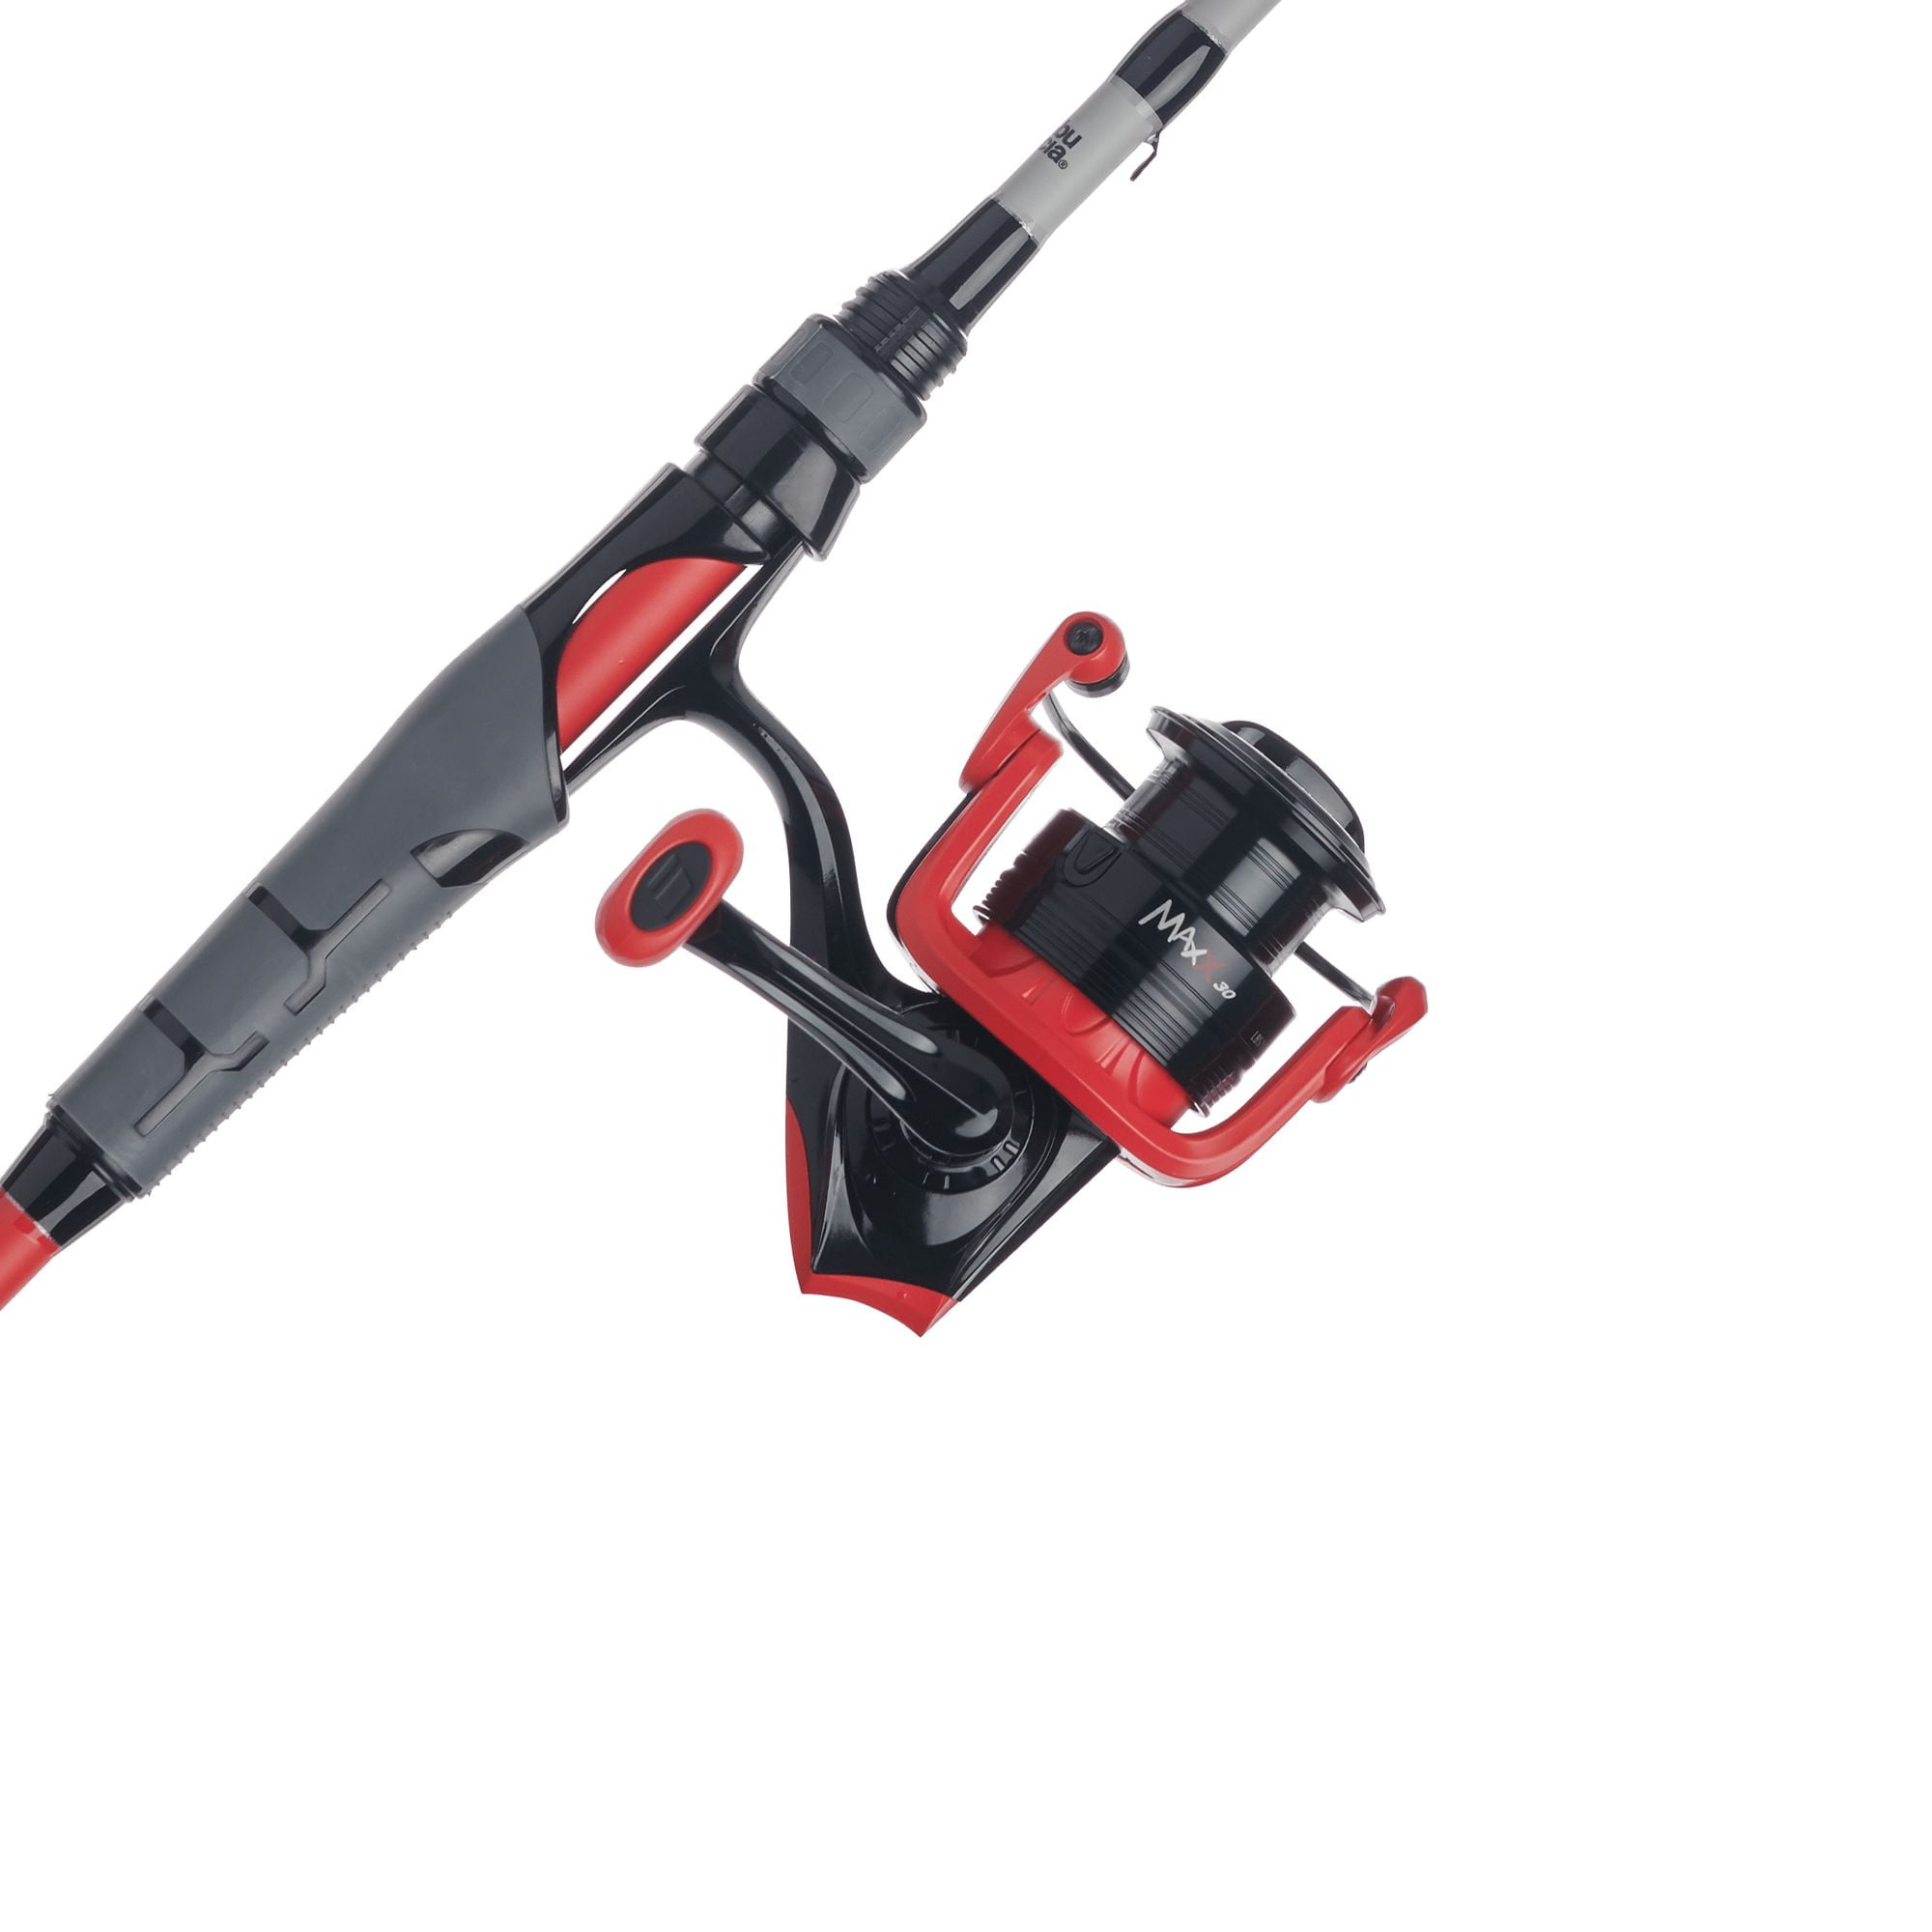 Daiwa Mini System Minispin Ultralight Spinning Reel and Rod Combo in Hard  Carry Case 